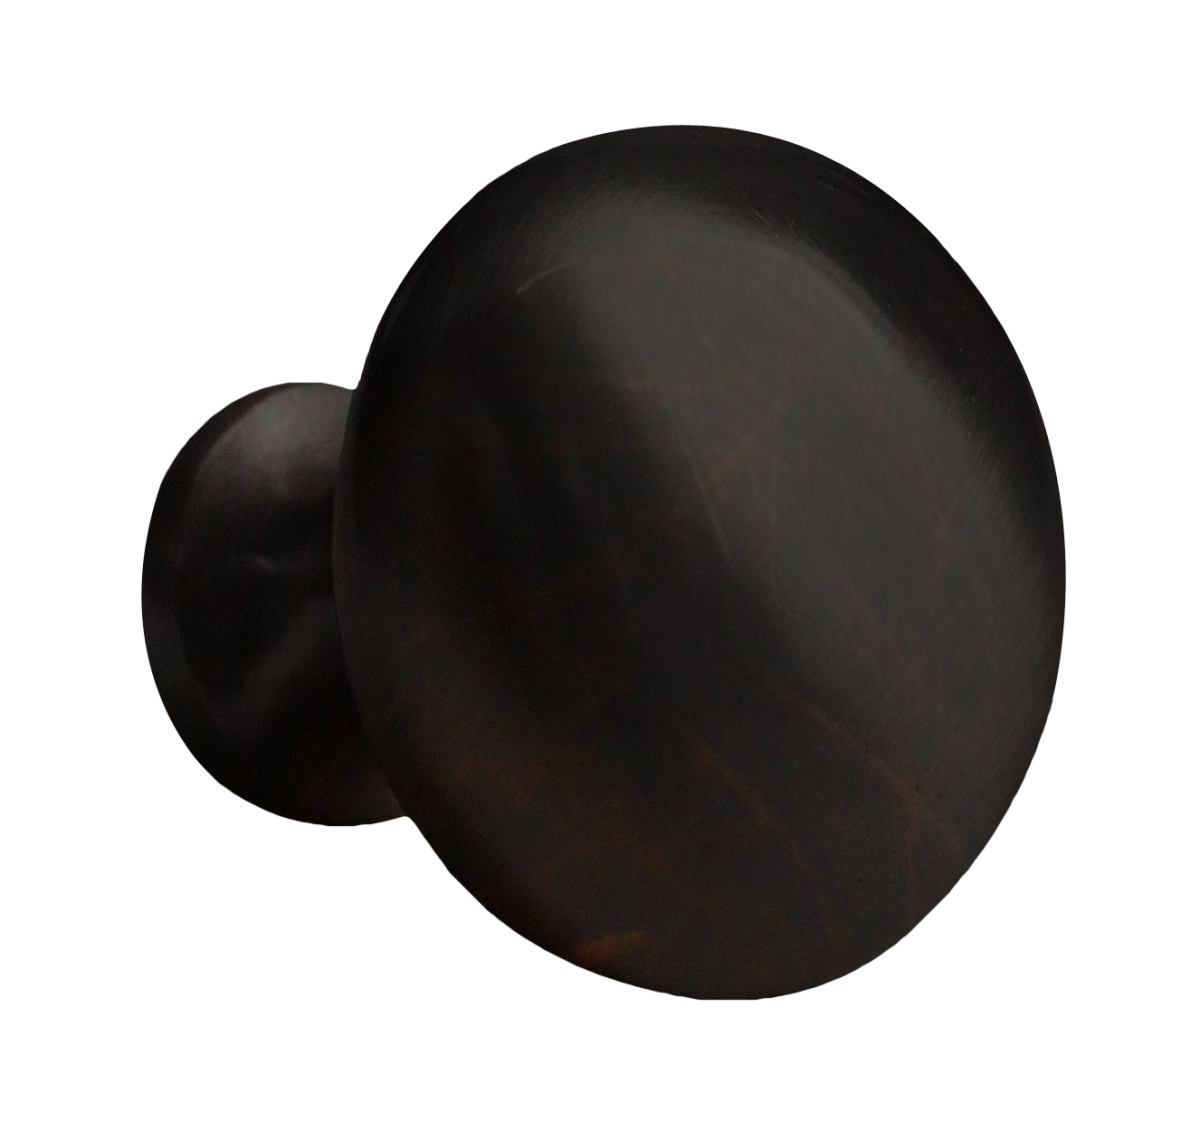 Ai-21414 1.25 In. Round Stainless Steel Cabinet Knob, Oil Rubbed Bronze